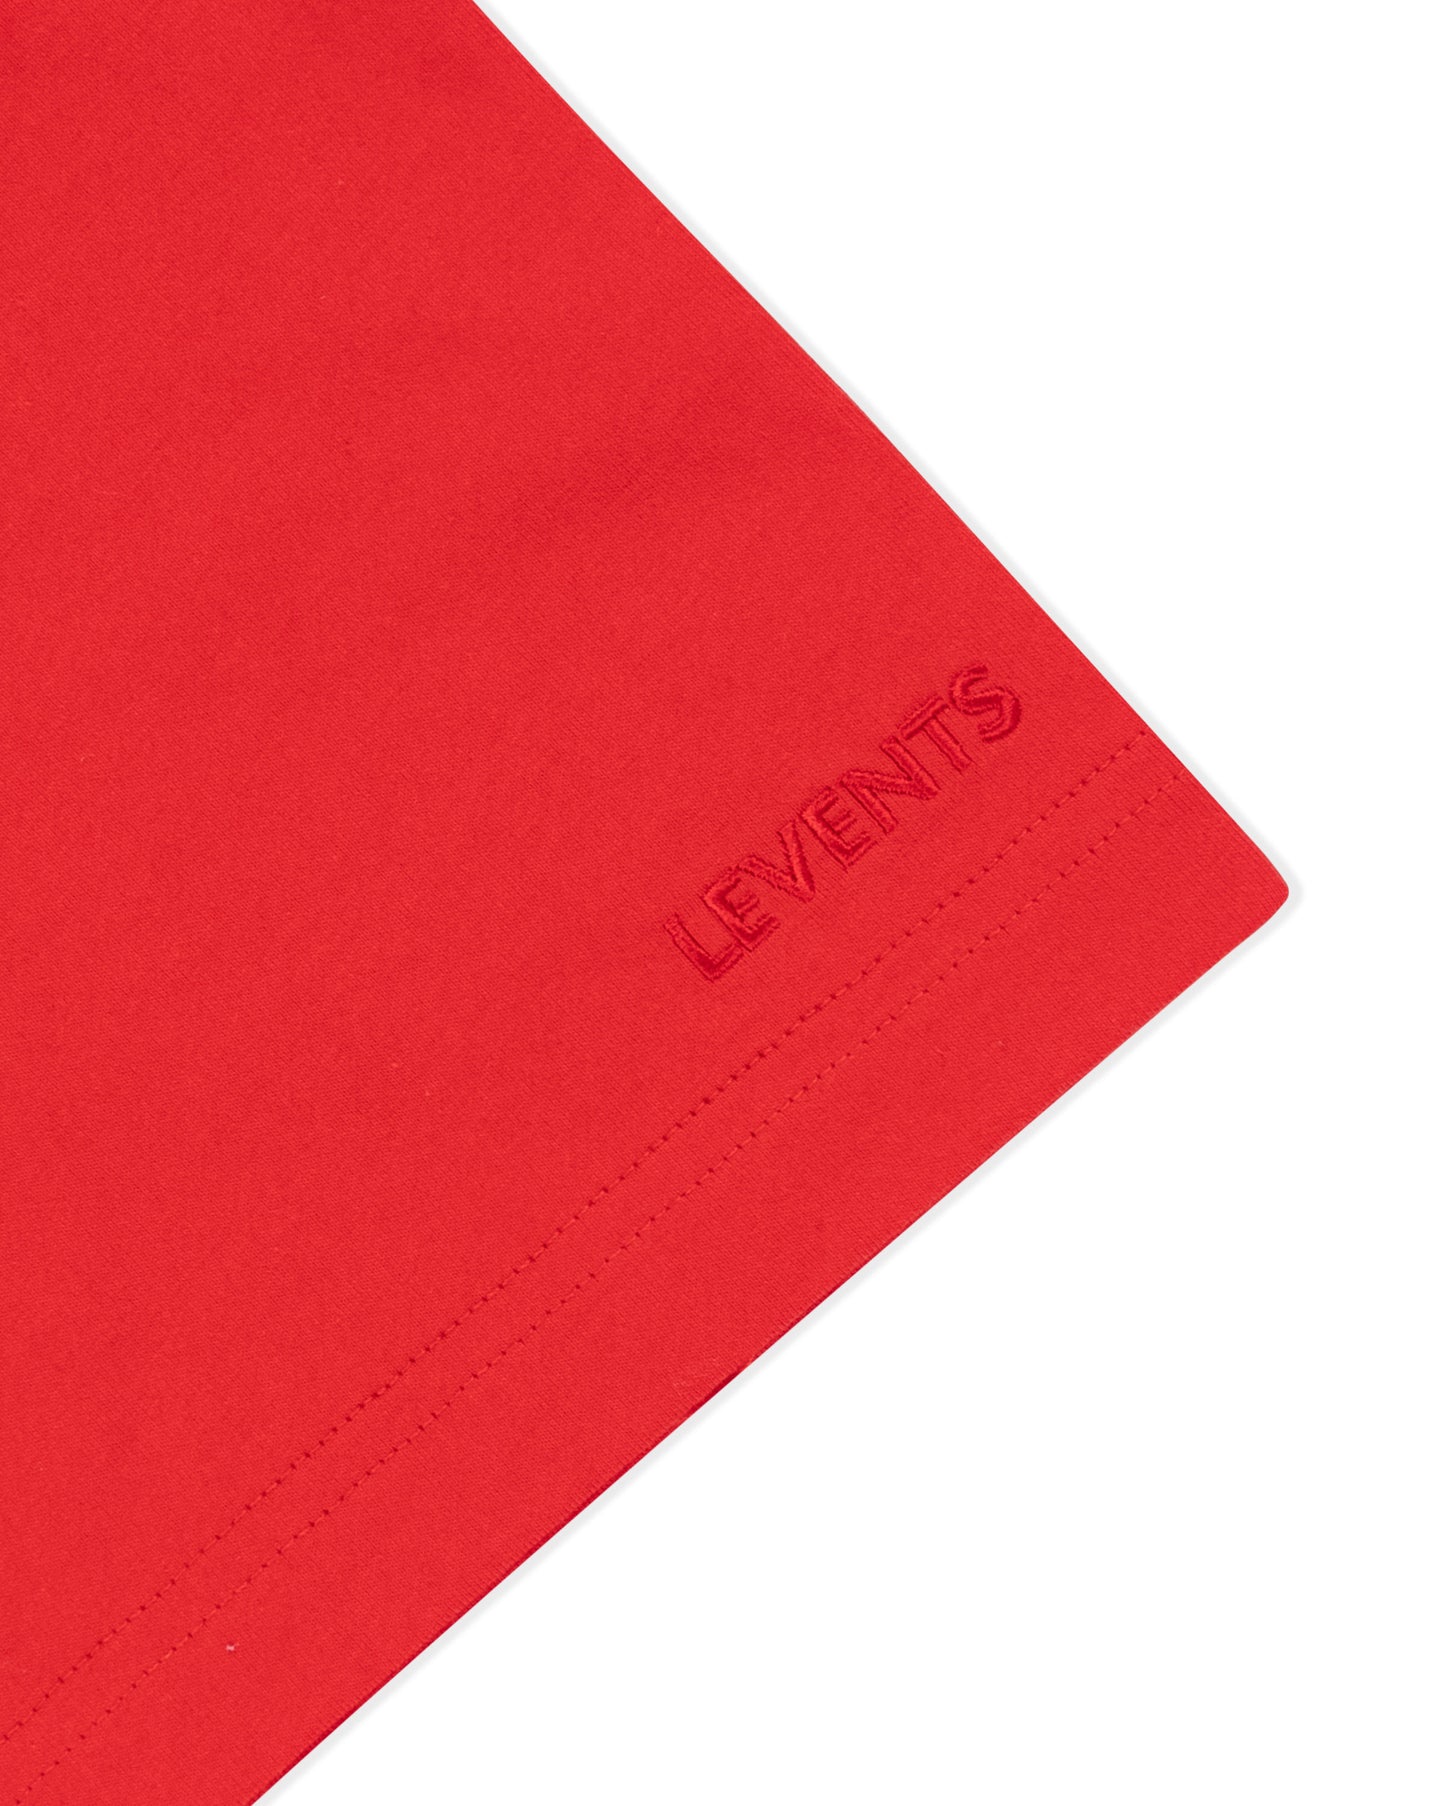 Levents® Dragon Tee/ Red